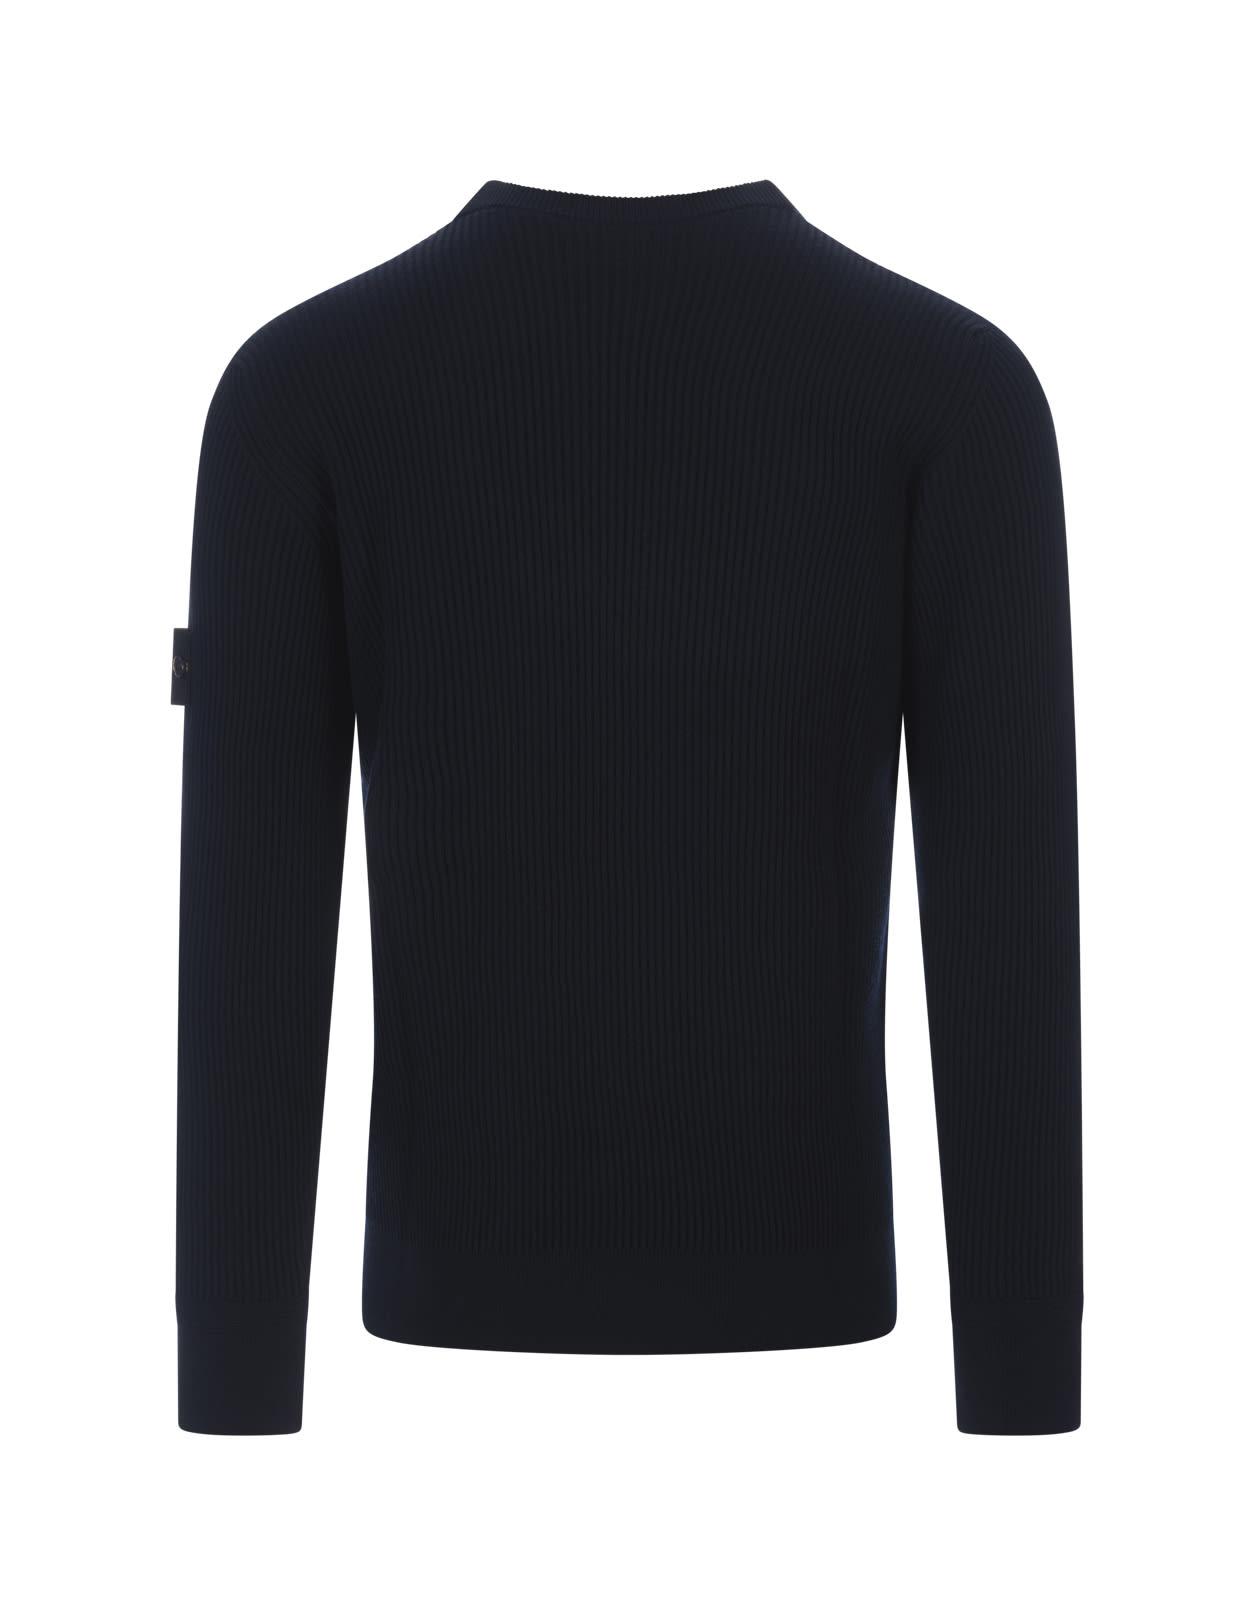 Stone Island Navy Ribbed Knitted Crew Neck Sweater in Blue for Men | Lyst